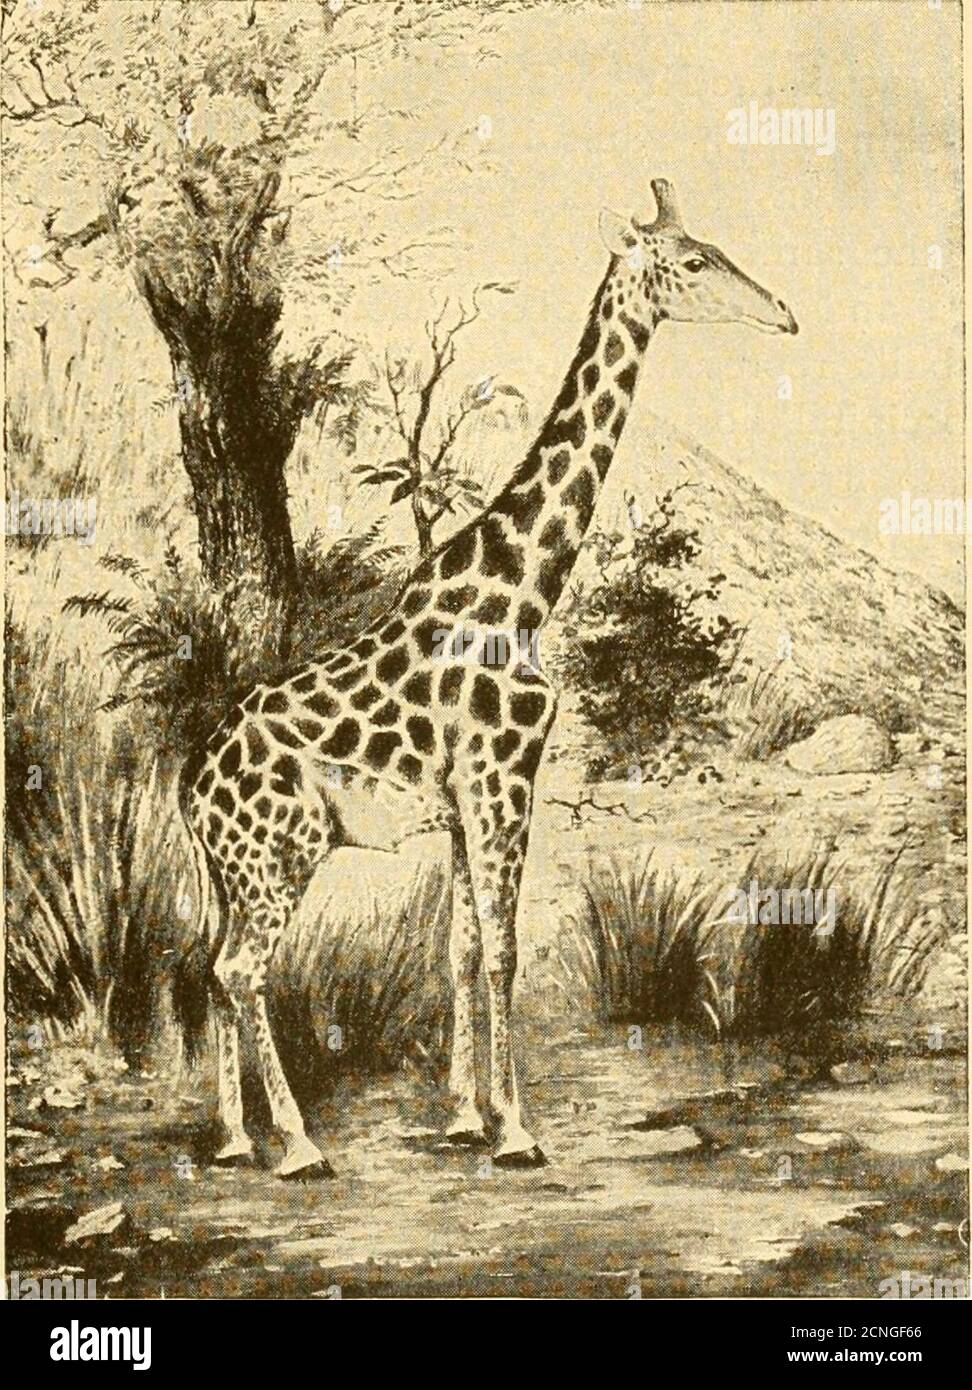 . The game animals of Africa . sence of a well-developed frontal horn, this giraffe isclearly allied to the northern and eastern races of the species ; but, onthe other hand, it resembles the South African race {G. c. capensis)in having the hind-legs spotted right down to the hoofs ; the fore-limbs also displaying the same feature, although less distinctly. Thesides of the head are much more fully spotted than in the Cape form,and the tail is remarkable for the great fulness of its terminal tuft.In the spotting of the legs this giraffe resembles most specimens of GIRAFFE 365 G. c. tippelskircJ Stock Photo